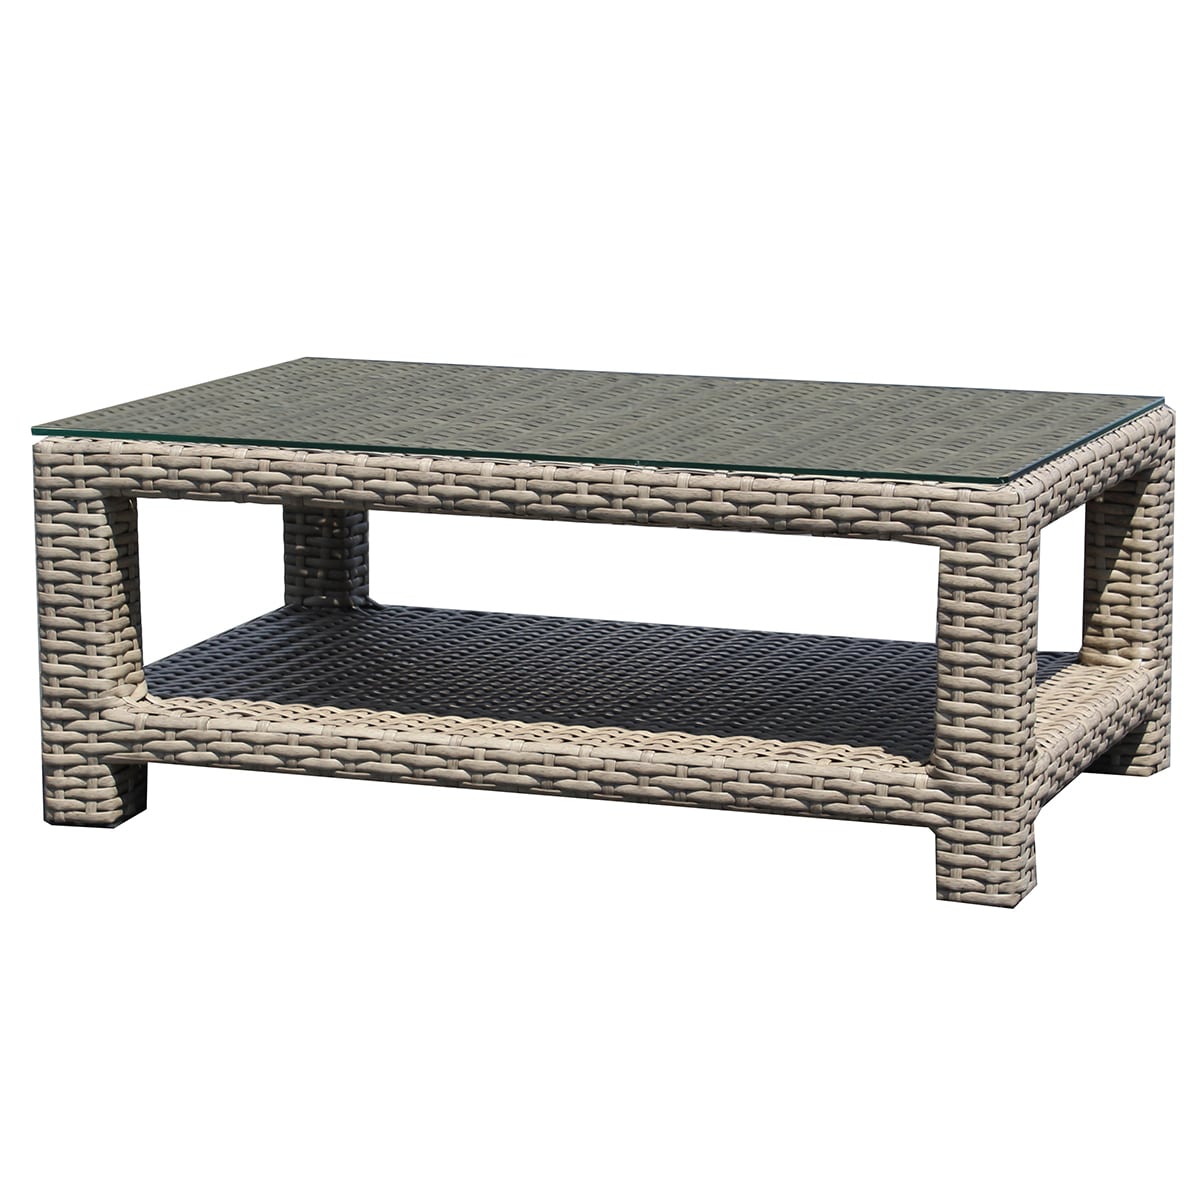 Forever Patio Cavalier Wicker Rectangle Coffee Table with Bottom Shelf in Buff